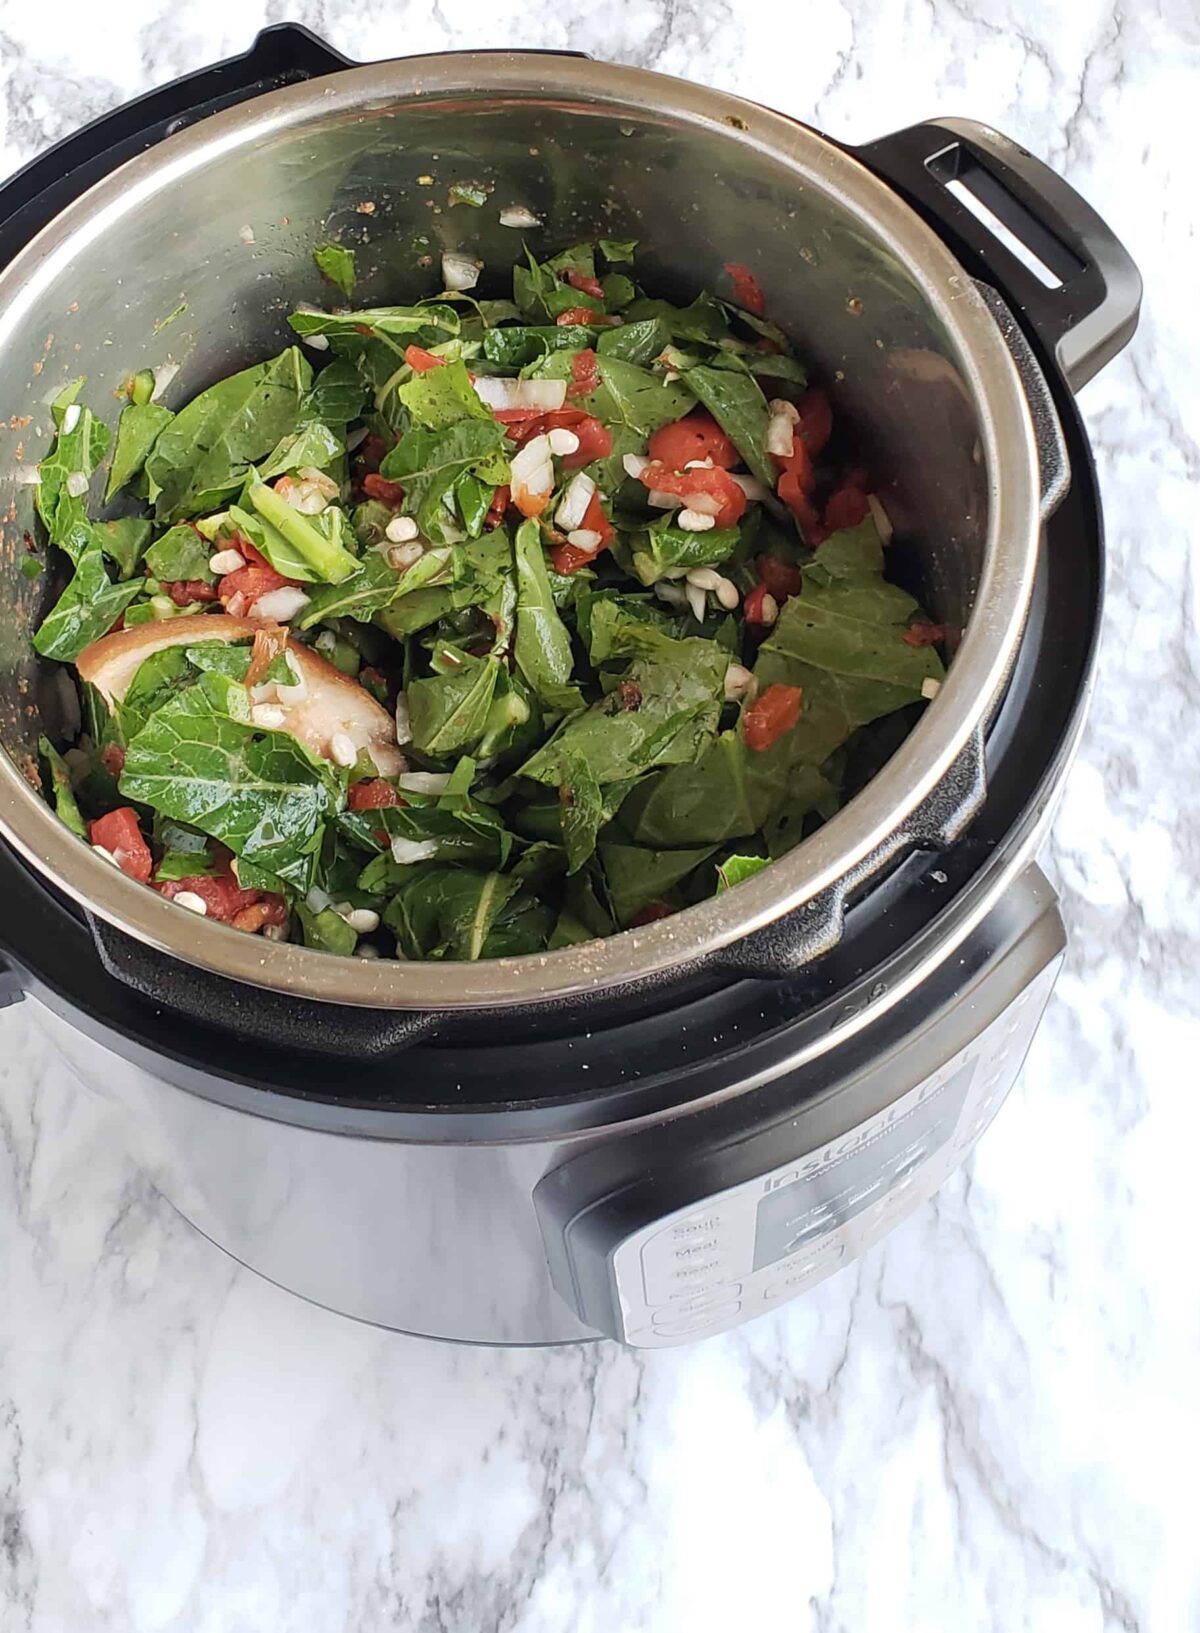 Tossed ingredients of Collard Greens and Navy Beans in the Instant 